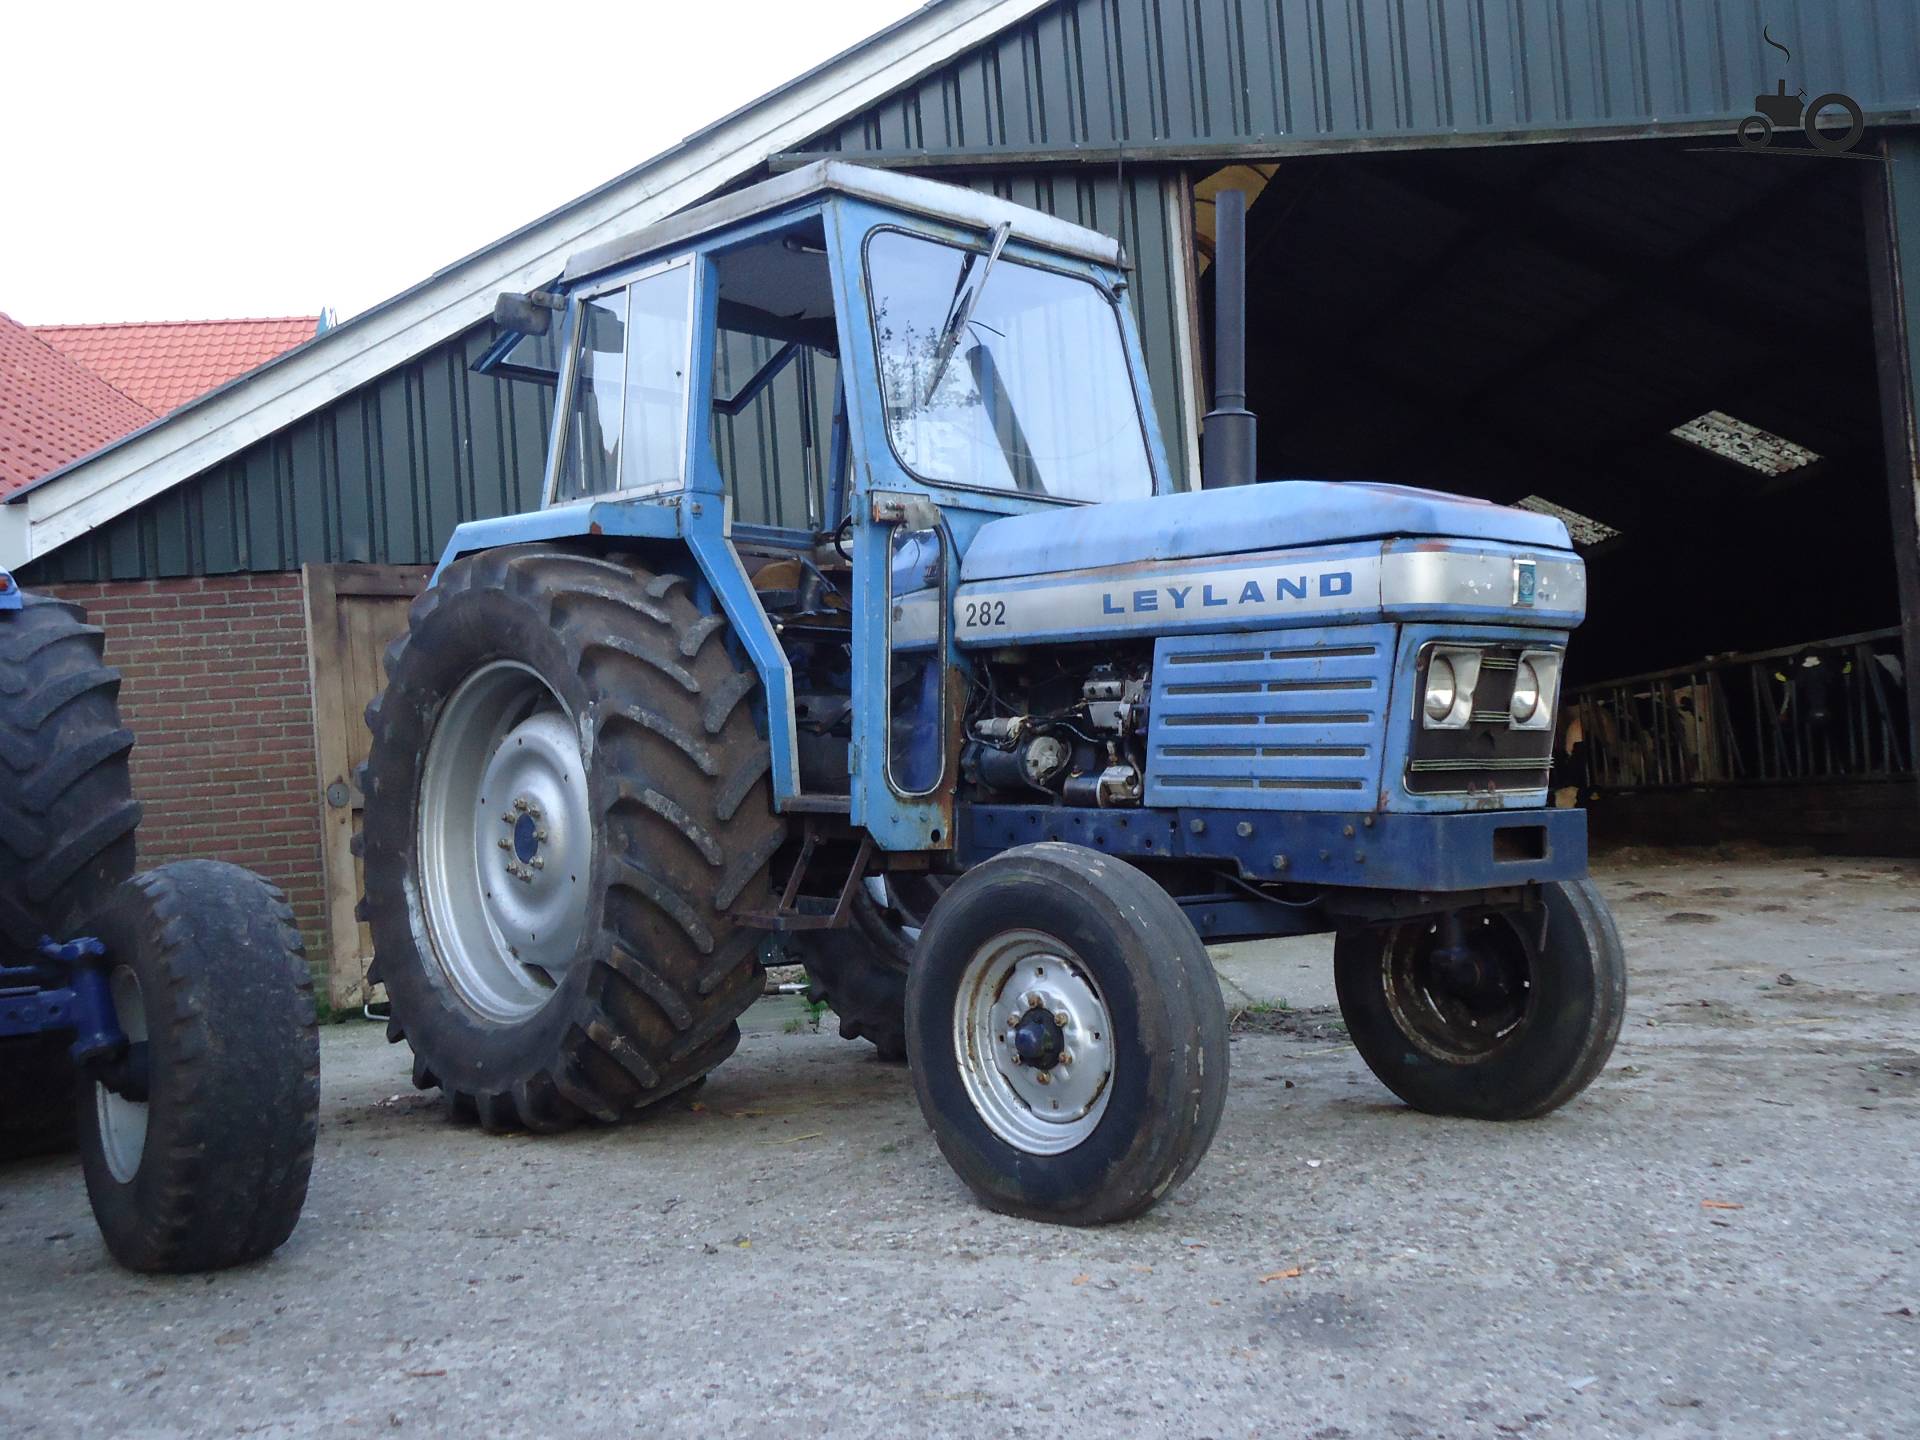 Leyland 282 Turbo Specs and data - Everything about the Leyland 282 ...